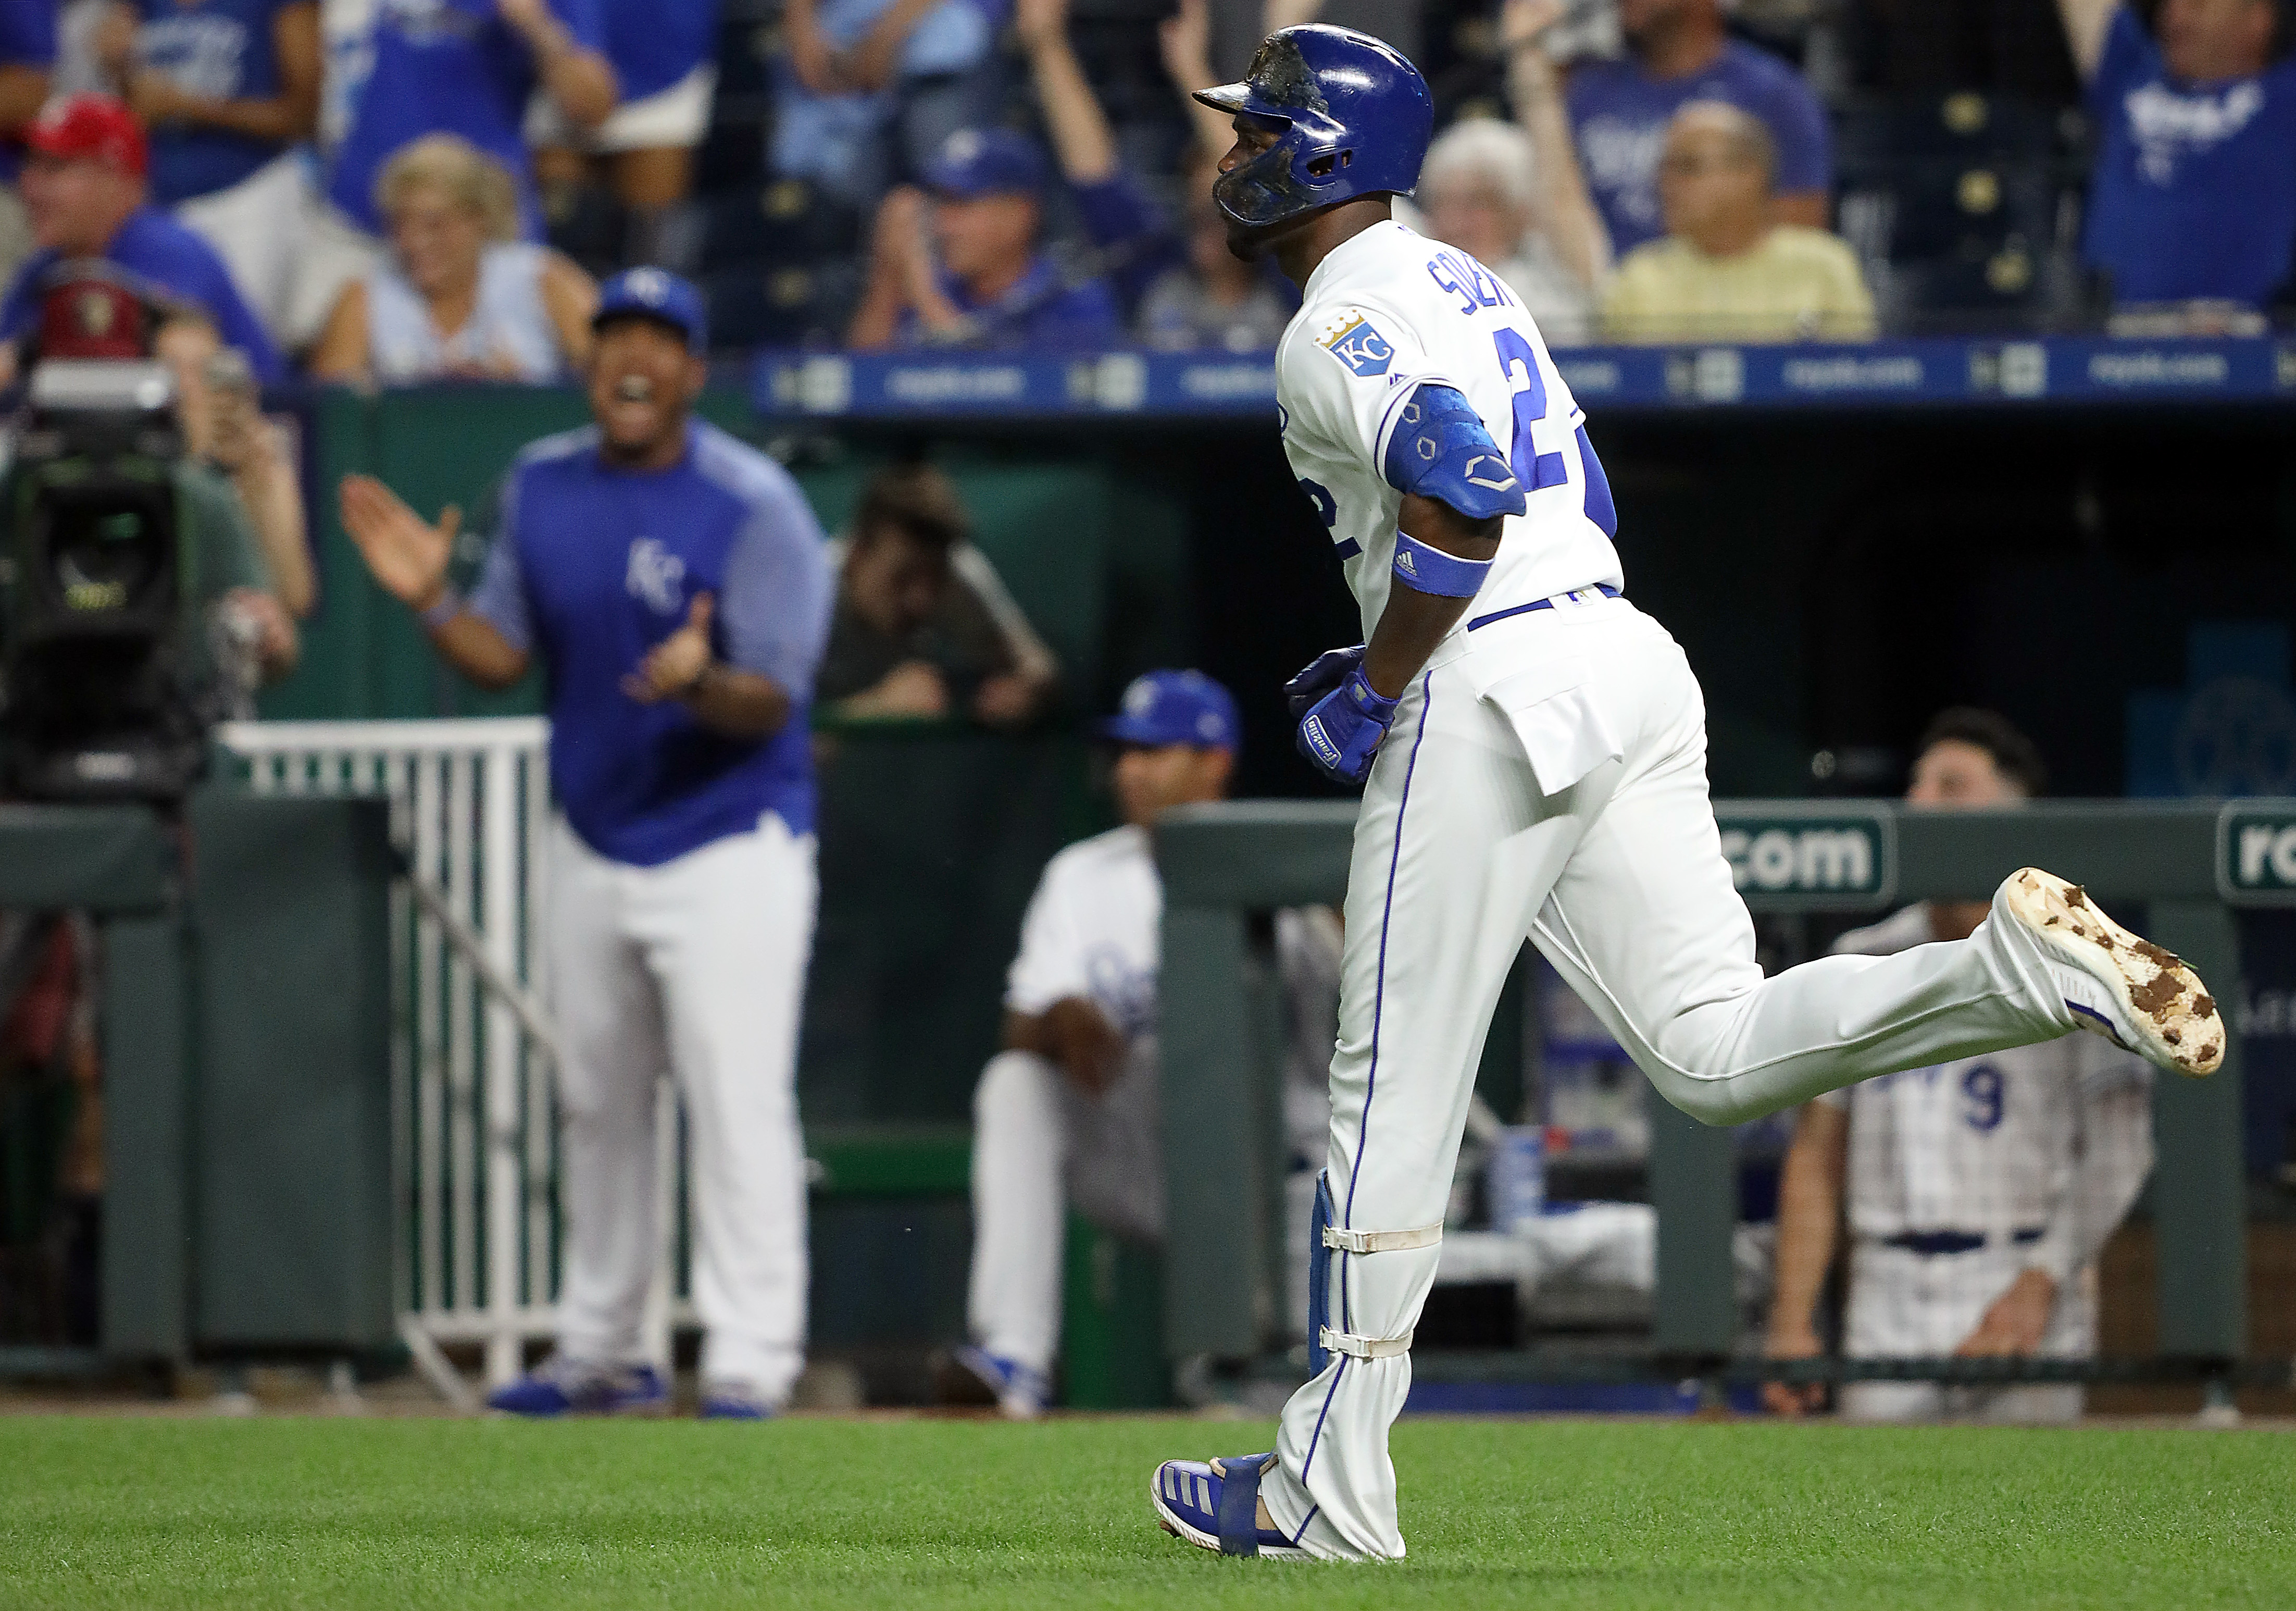 Jorge Soler #12 of the Kansas City Royals rounds the bases after hitting his 39th home run of the year, a single-season club record, during the 3rd inning of the game against the Detroit Tigers at Kauffman Stadium on September 03, 2019 in Kansas City, Mis